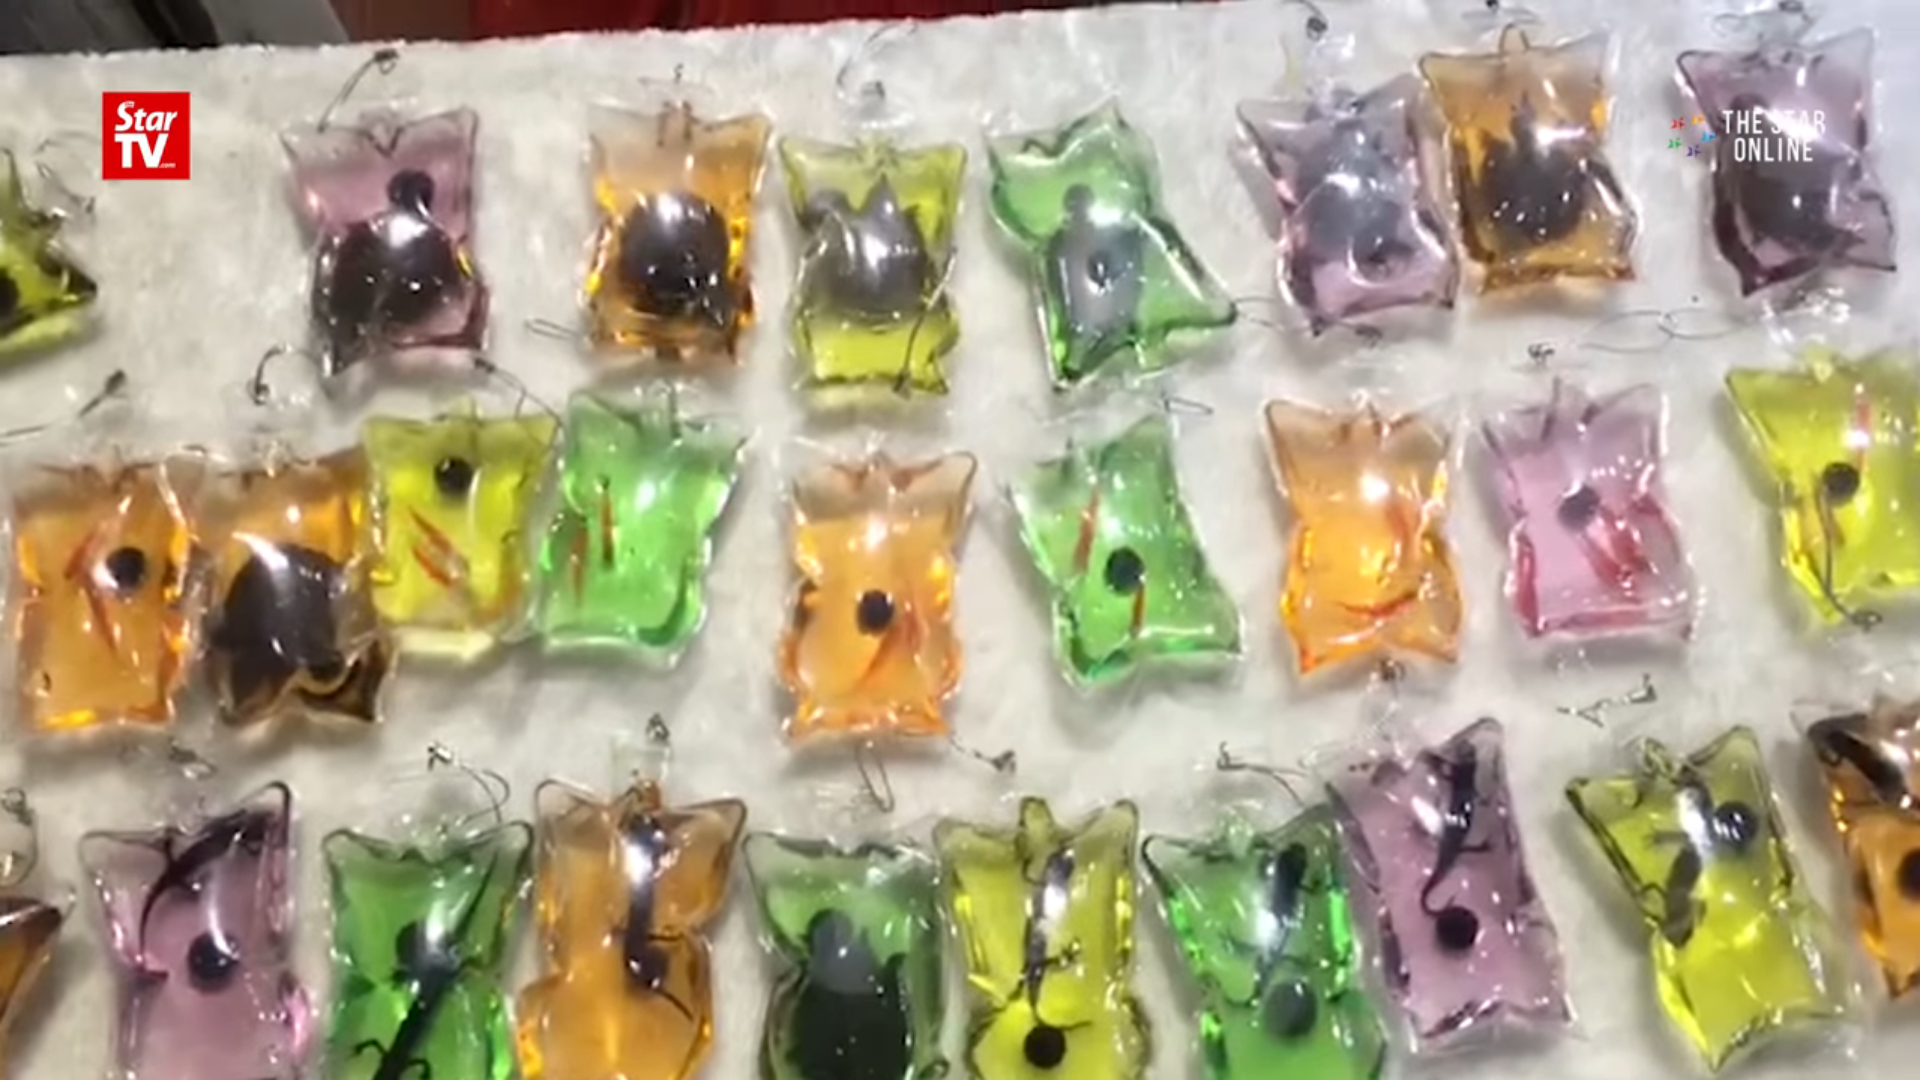 Live Animals Key-Chain Sold In China Garnered Severe Critism - World Of Buzz